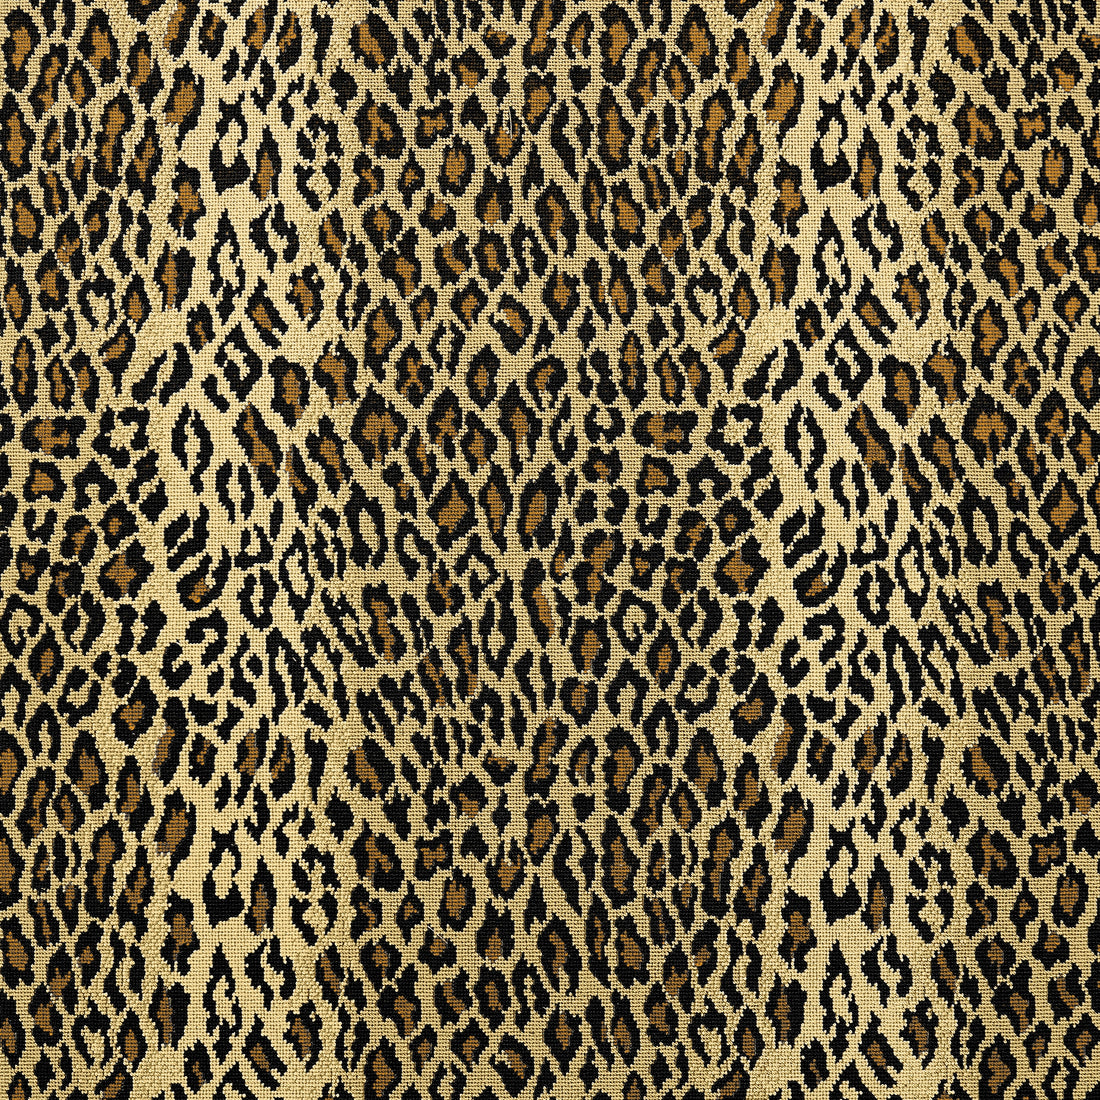 Amur fabric in gold color - pattern number W80436 - by Thibaut in the Woven Resource Vol 10 Menagerie collection